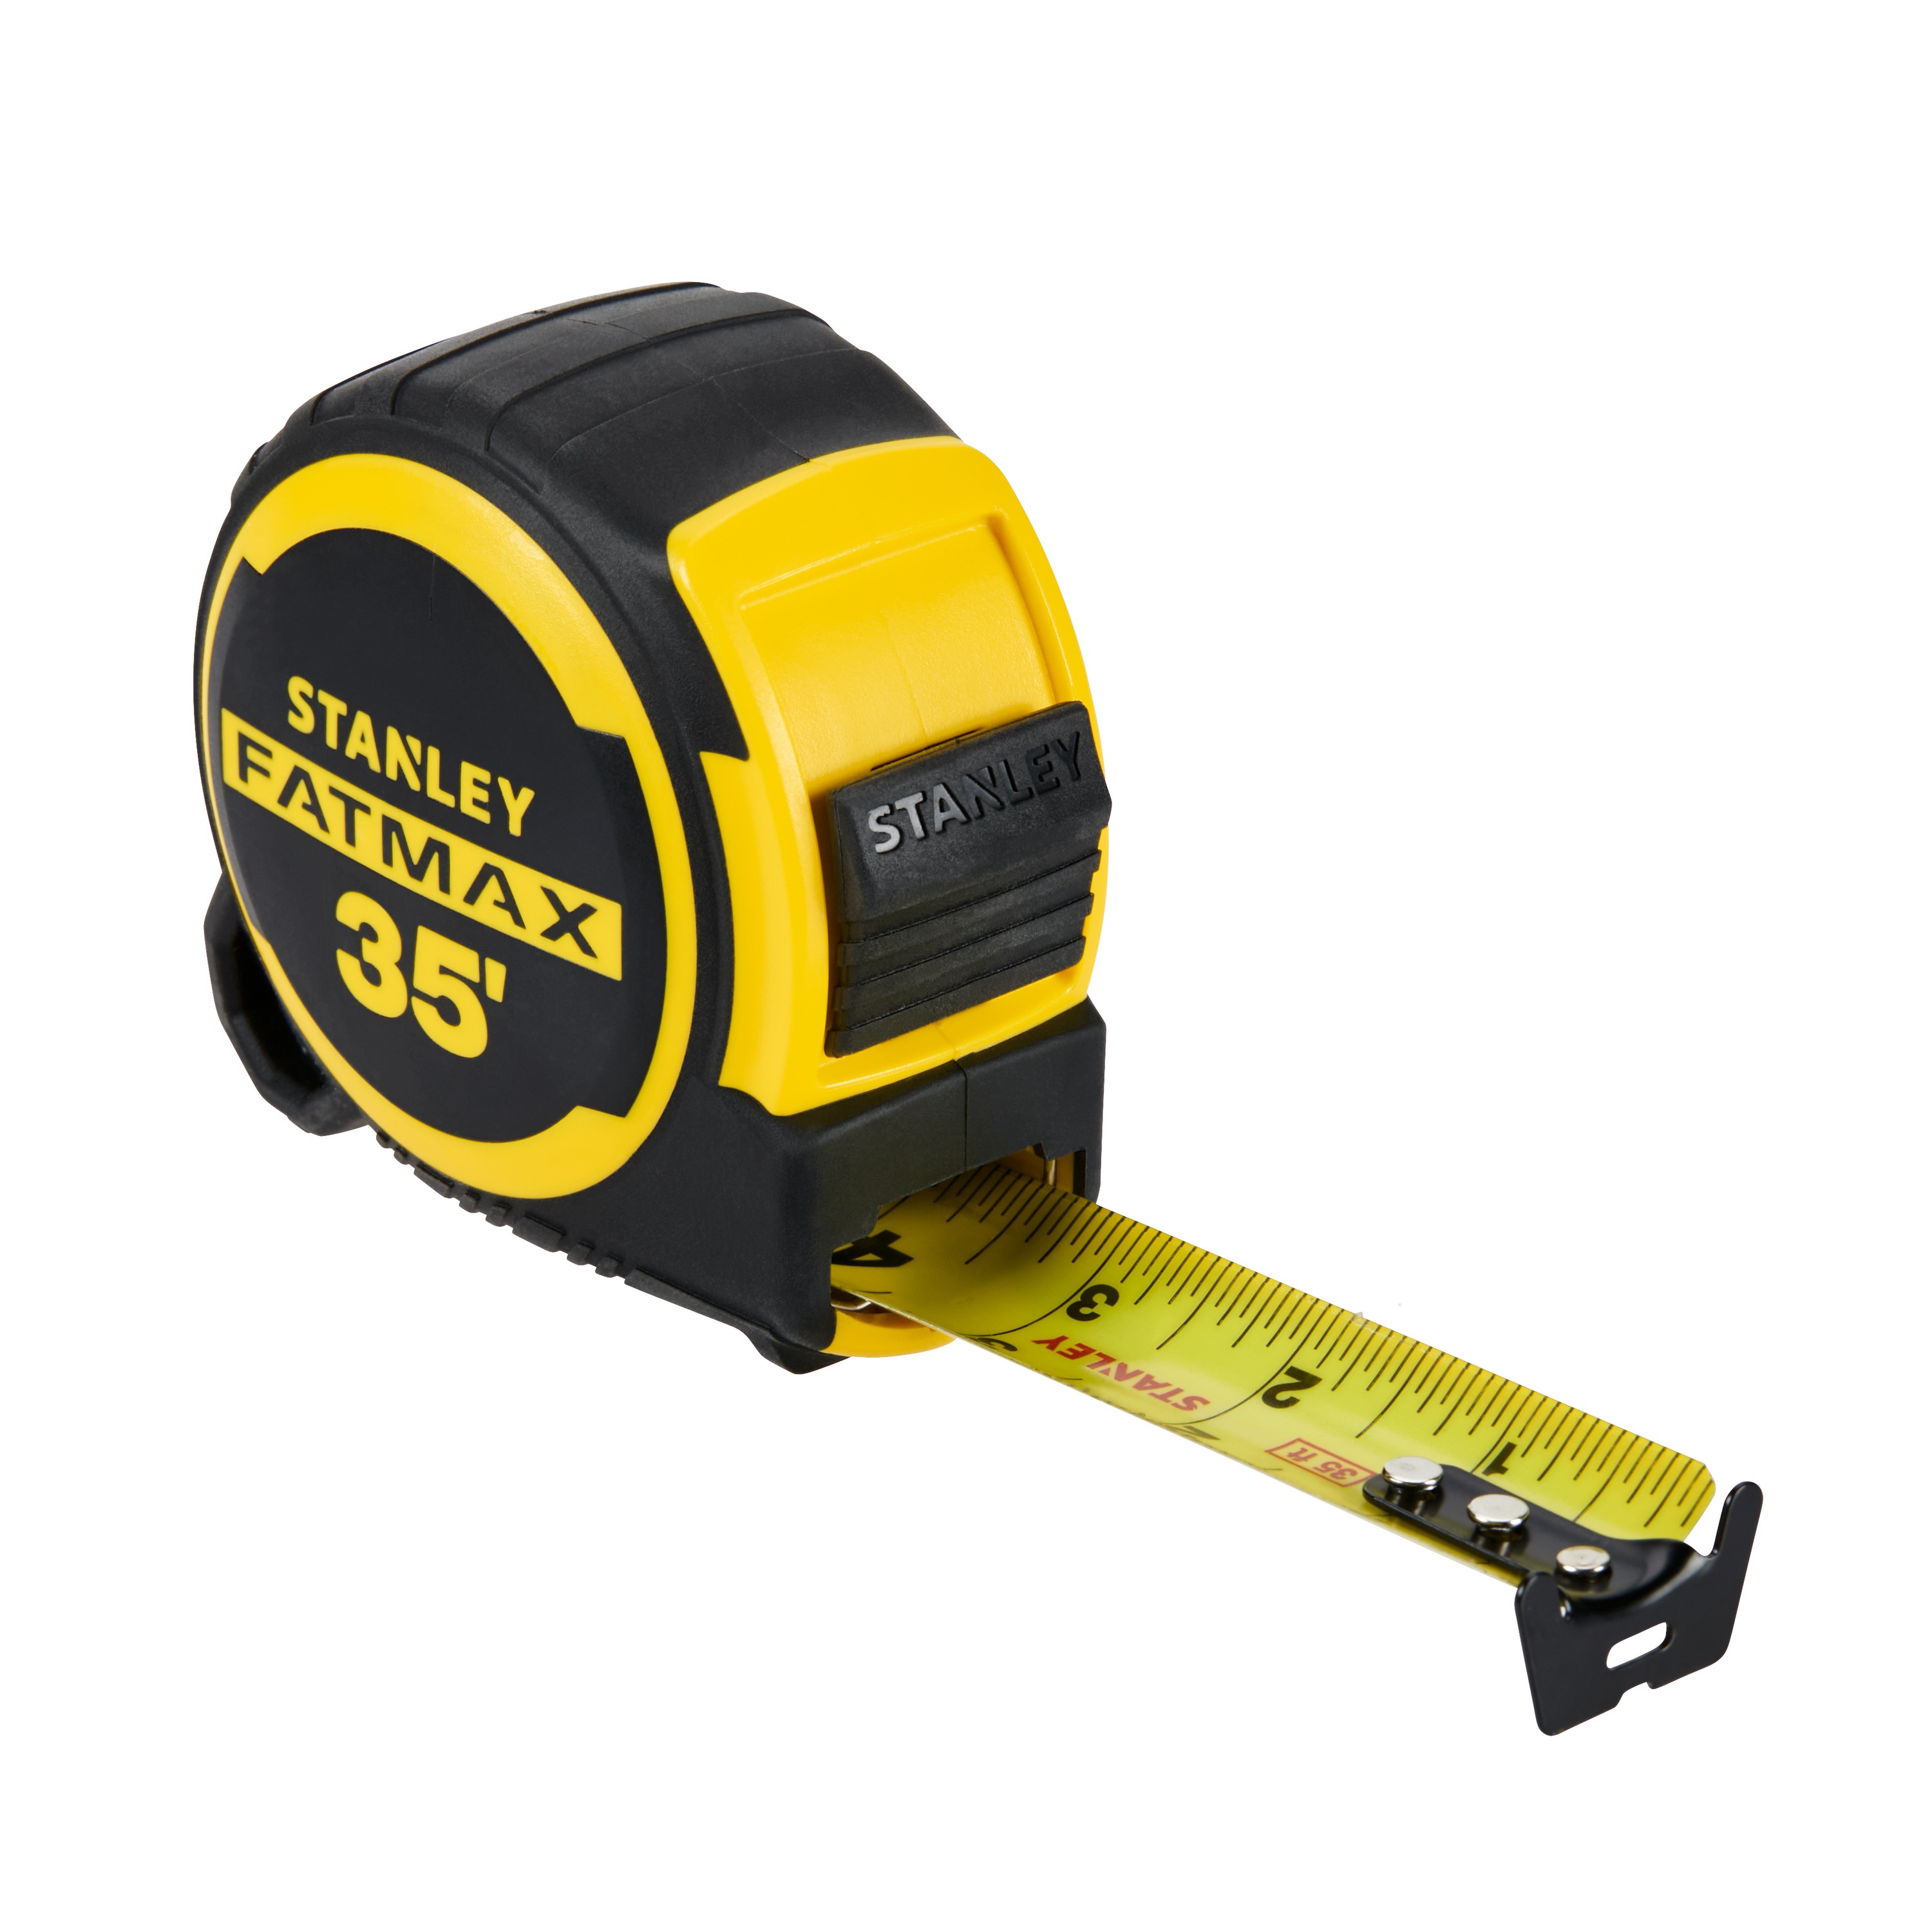 Stanley Tools - 35 ft FATMAX Tape Measure - FMHT36335THS